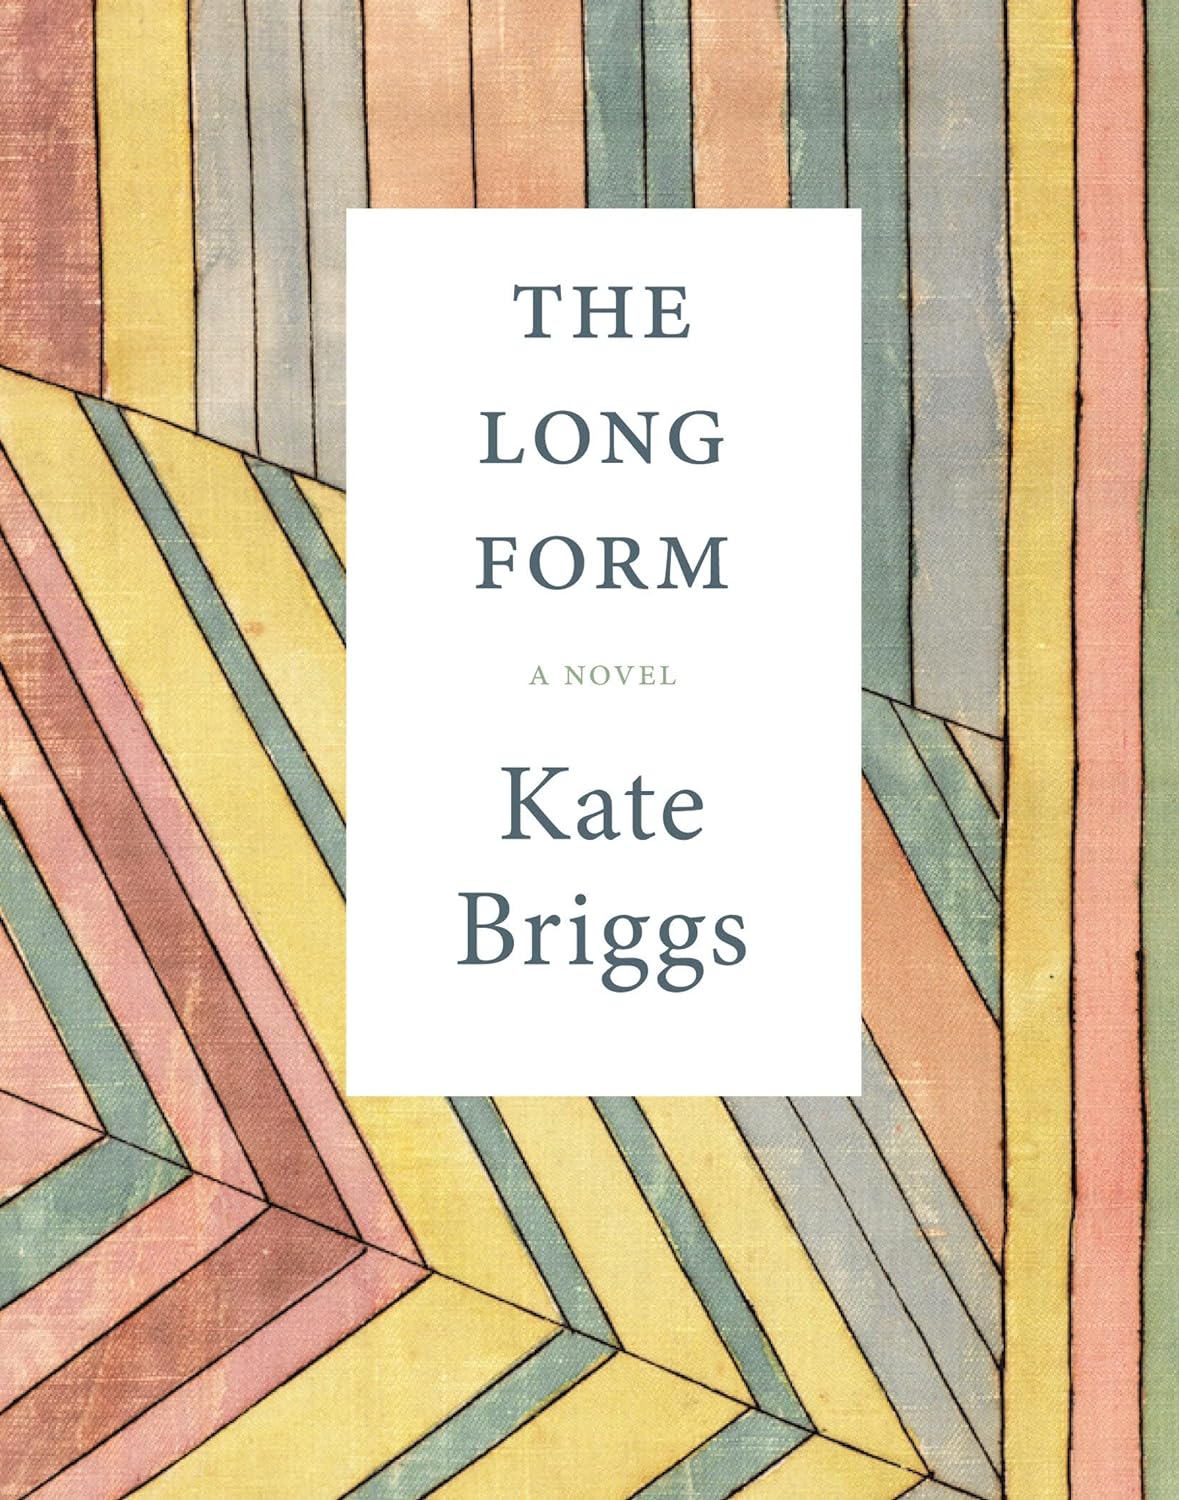 One of our recommended books is The Long Form by Kate Briggs